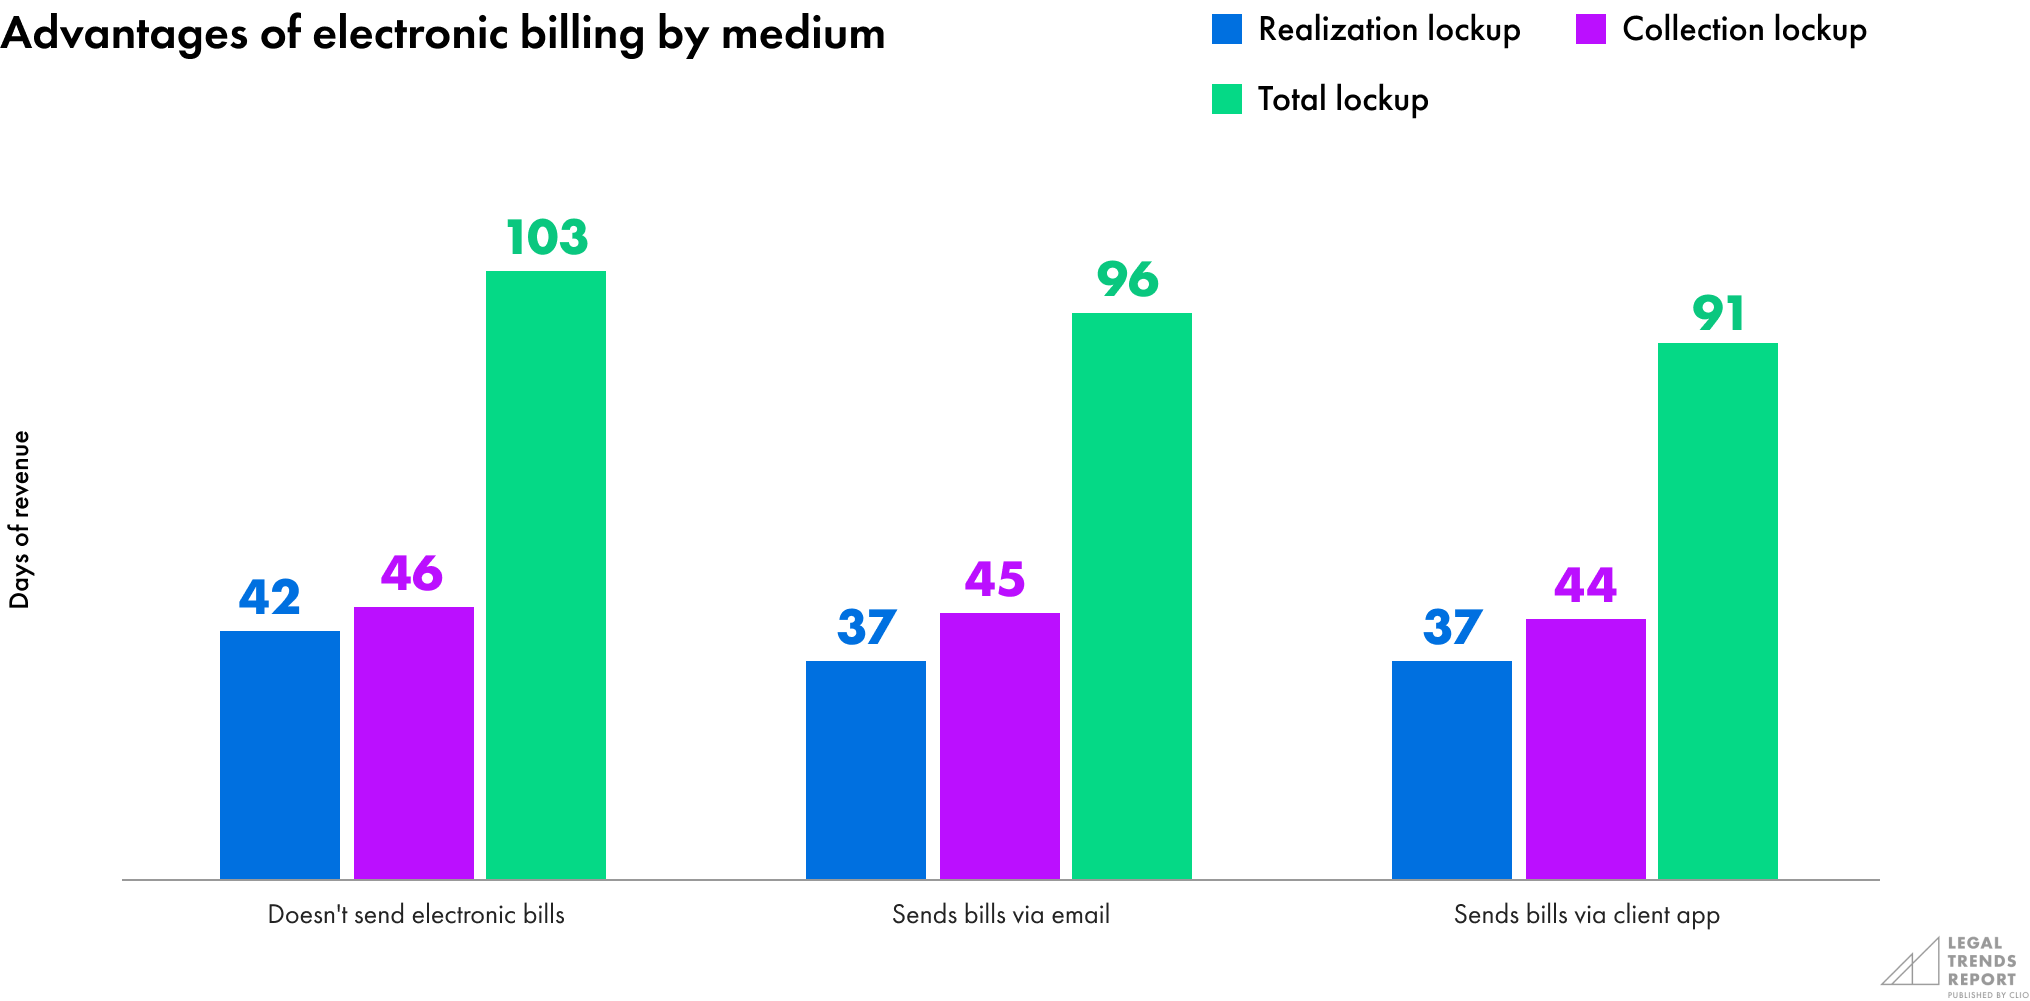 Advantages to key billing features